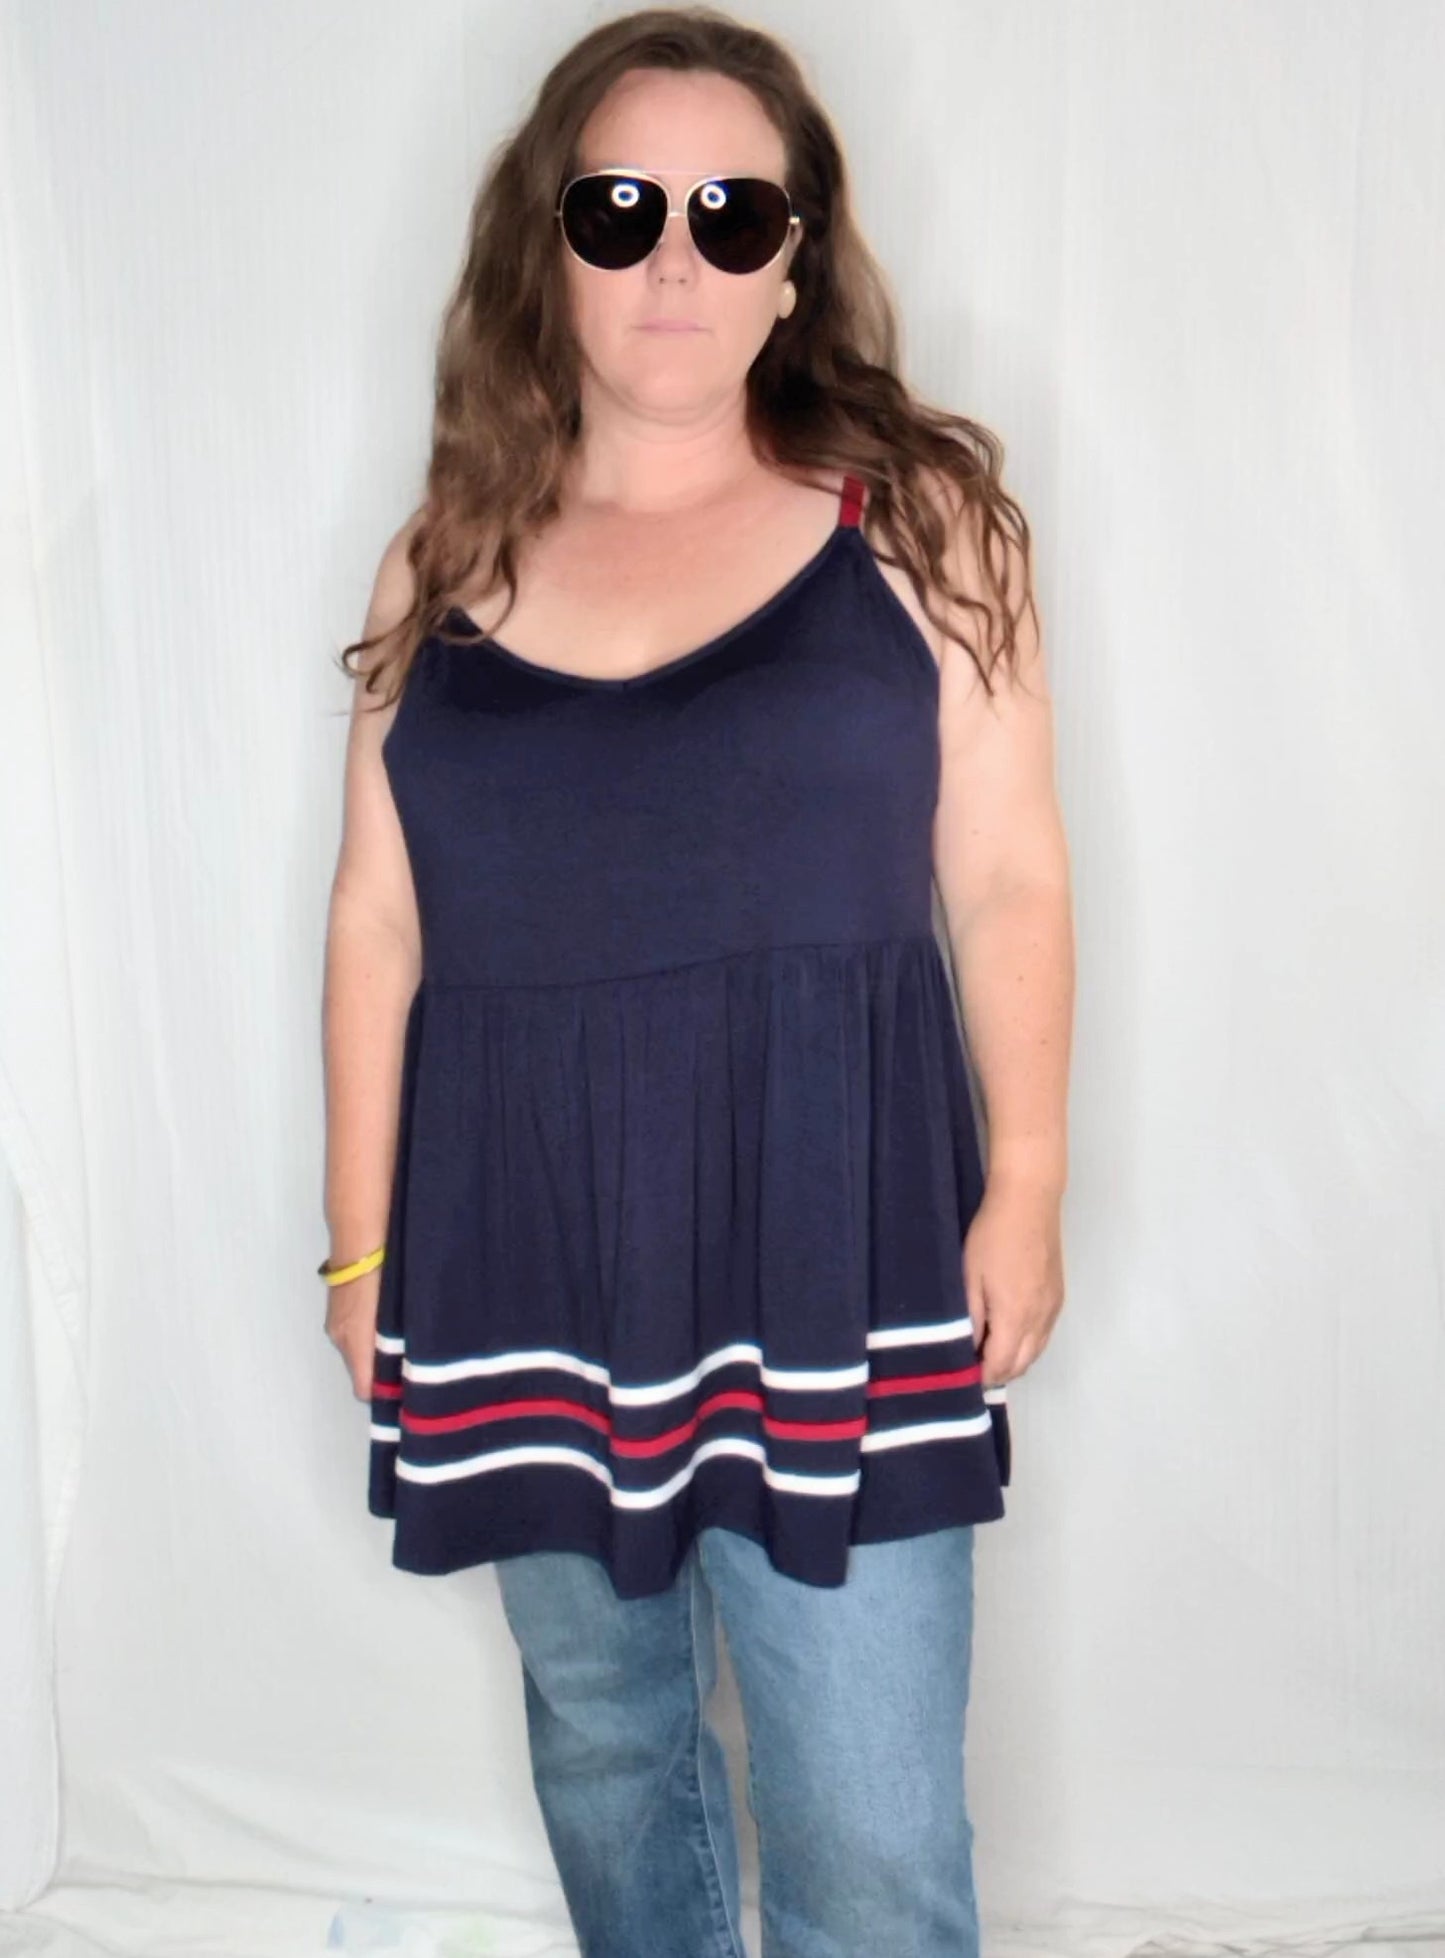 Torrid Babydoll Navy Blue and Red Sleeveless Top NWT - 3XL